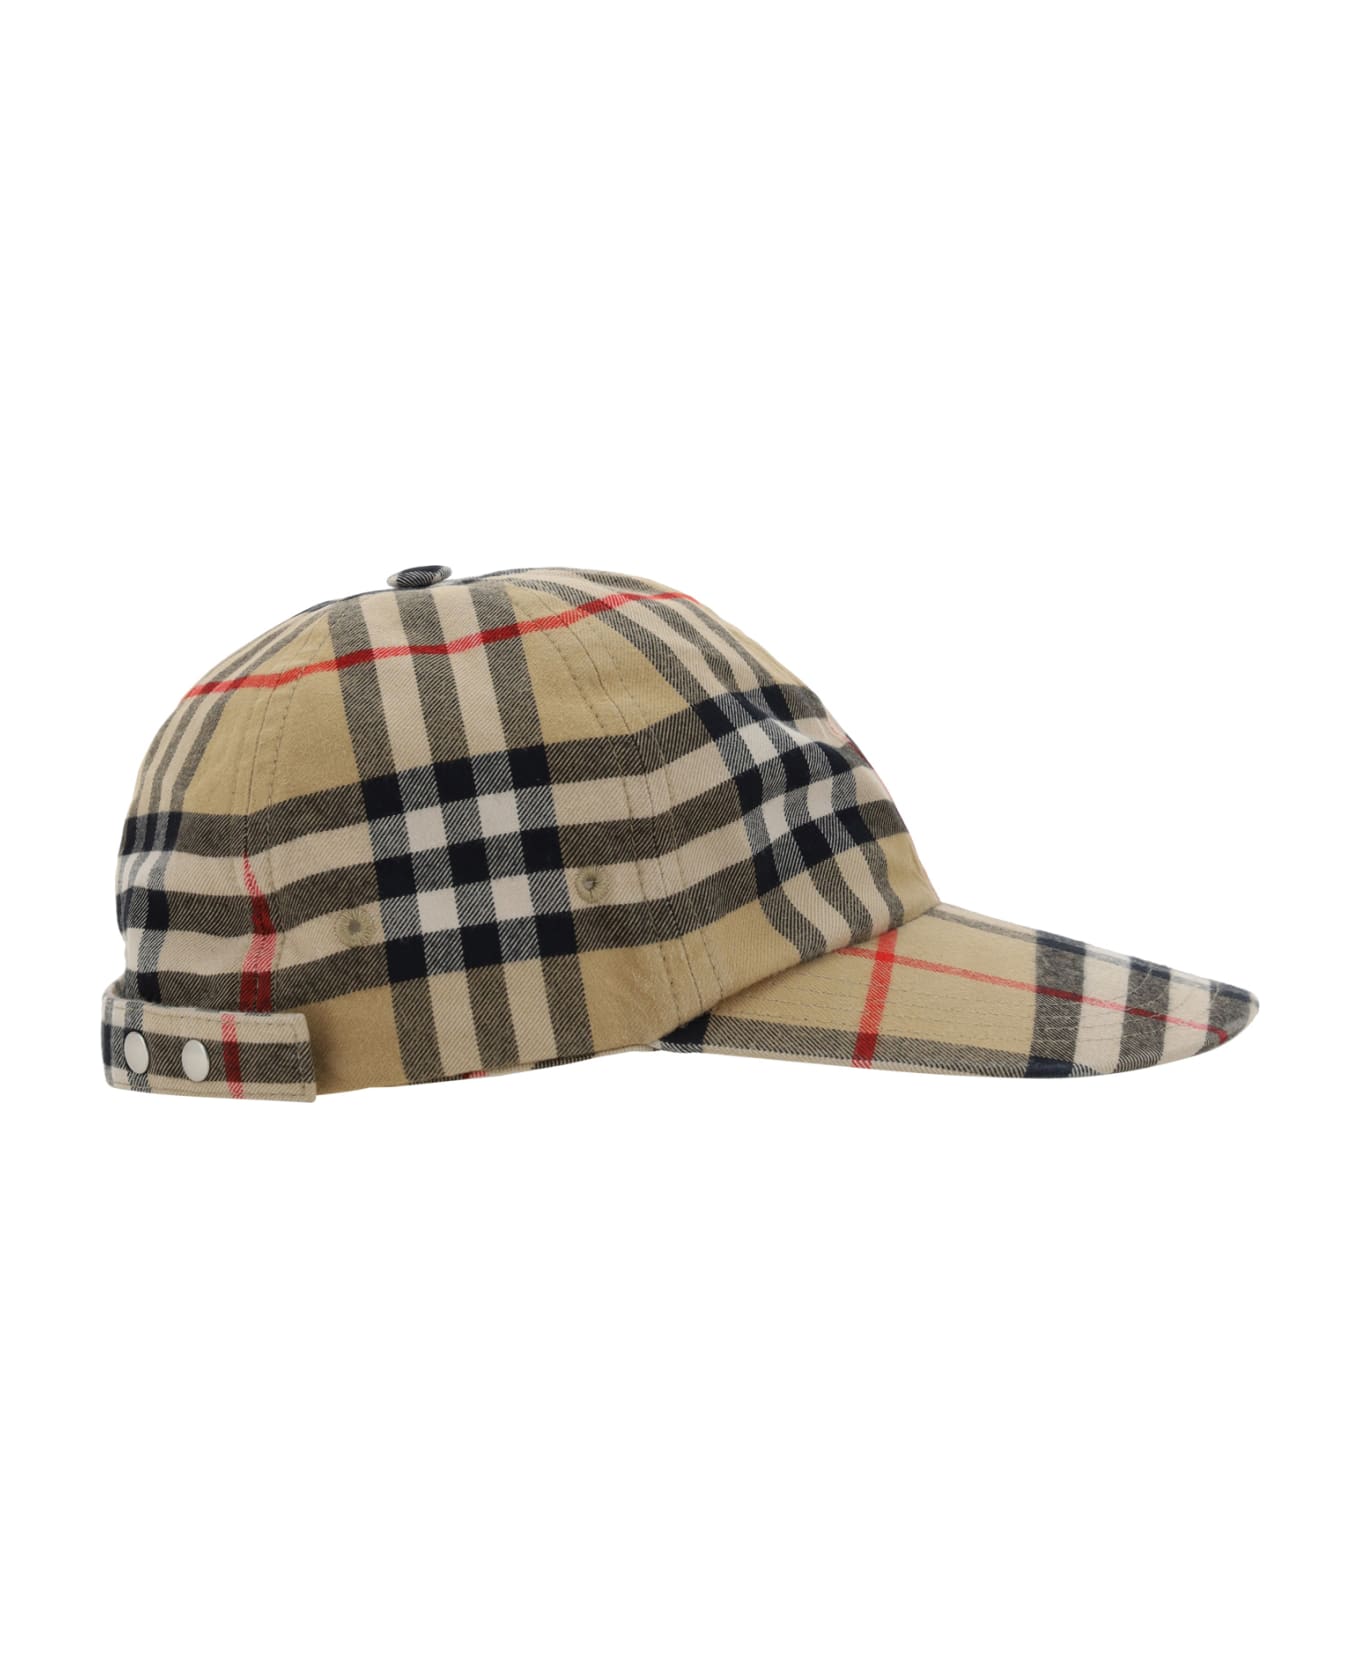 Burberry Baseball Cap With Check Print - Archive Beige